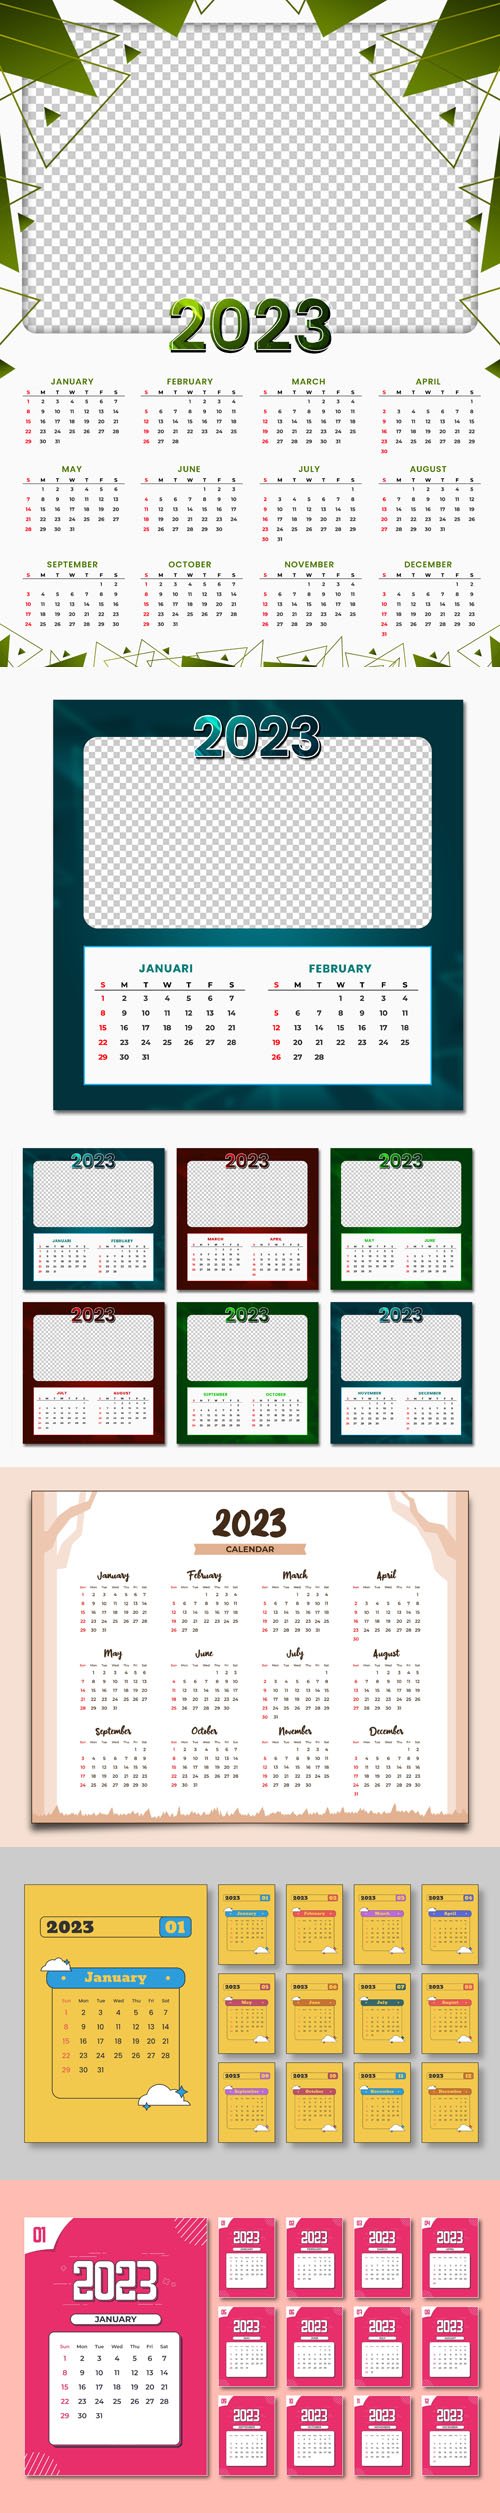 5 Calendars for New Year 2023 PSD Templates